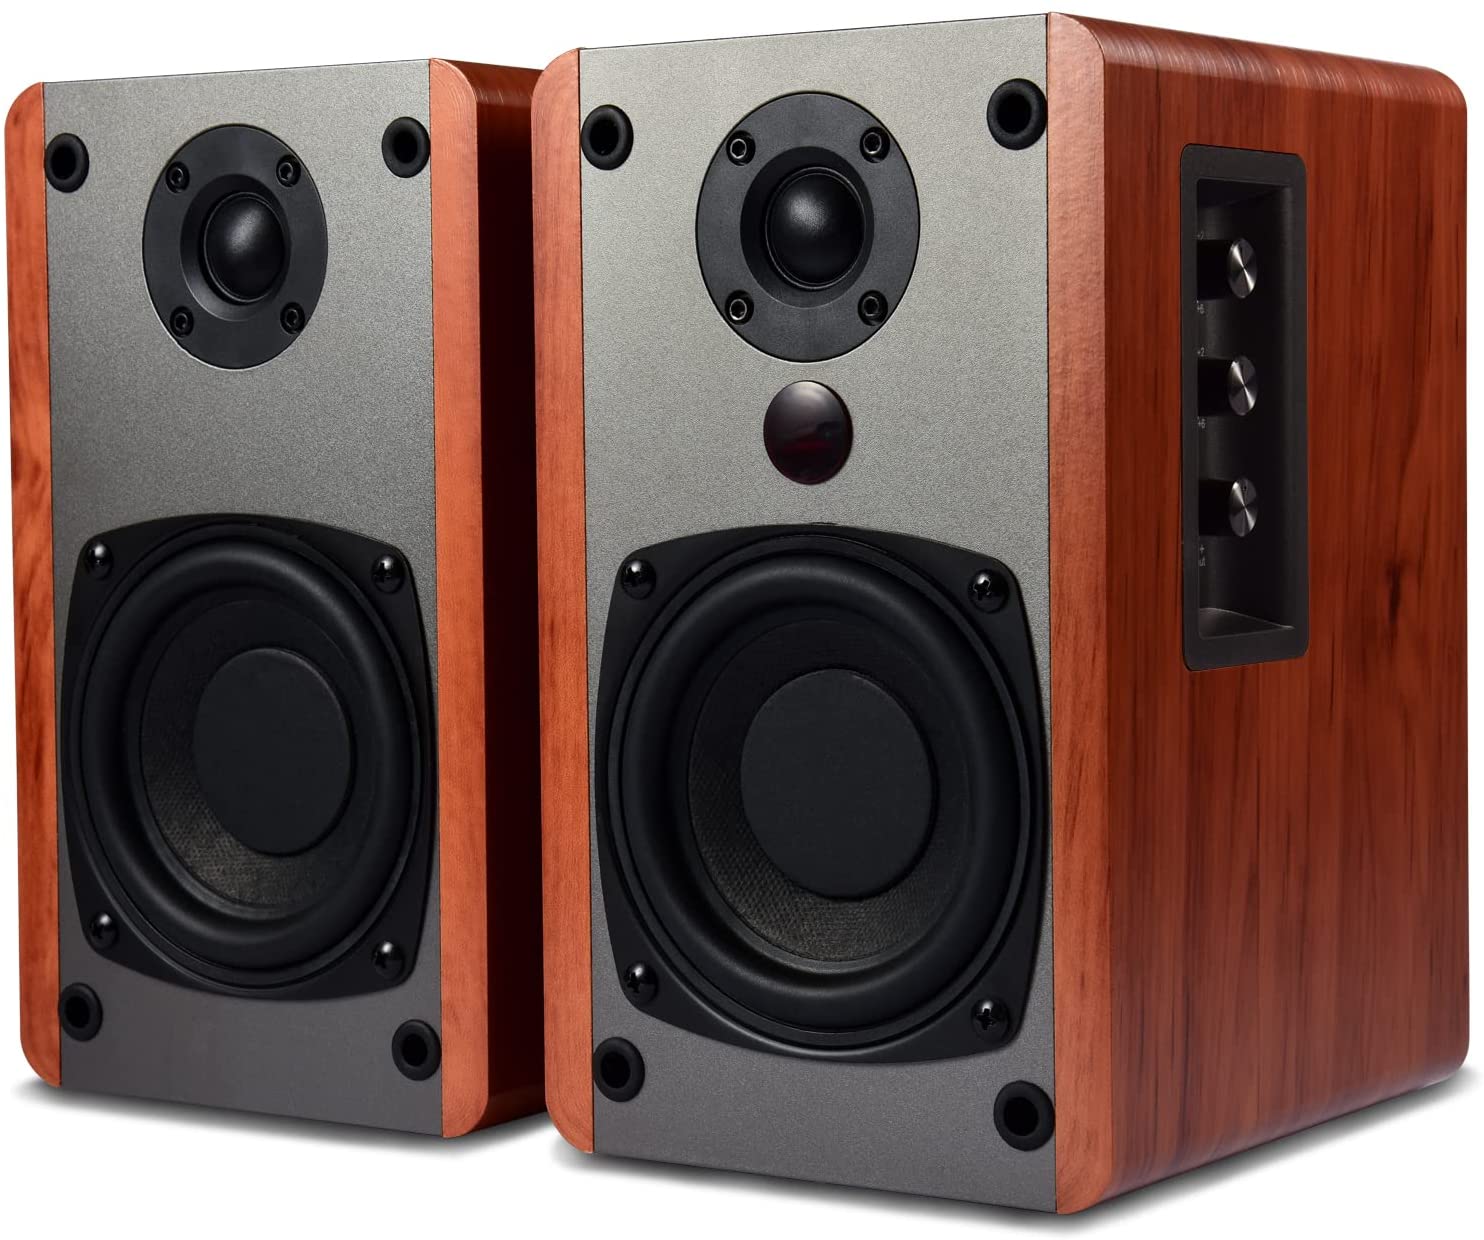 SINGING WOOD BT25 Bluetooth Powered Bookshelf Speakers for Record Player  with Built-in Amplifier -Studio Monitor Speaker Full Function Remote  Control -Wooden Enclosure 50 Watts RMS (Cherry Wood)